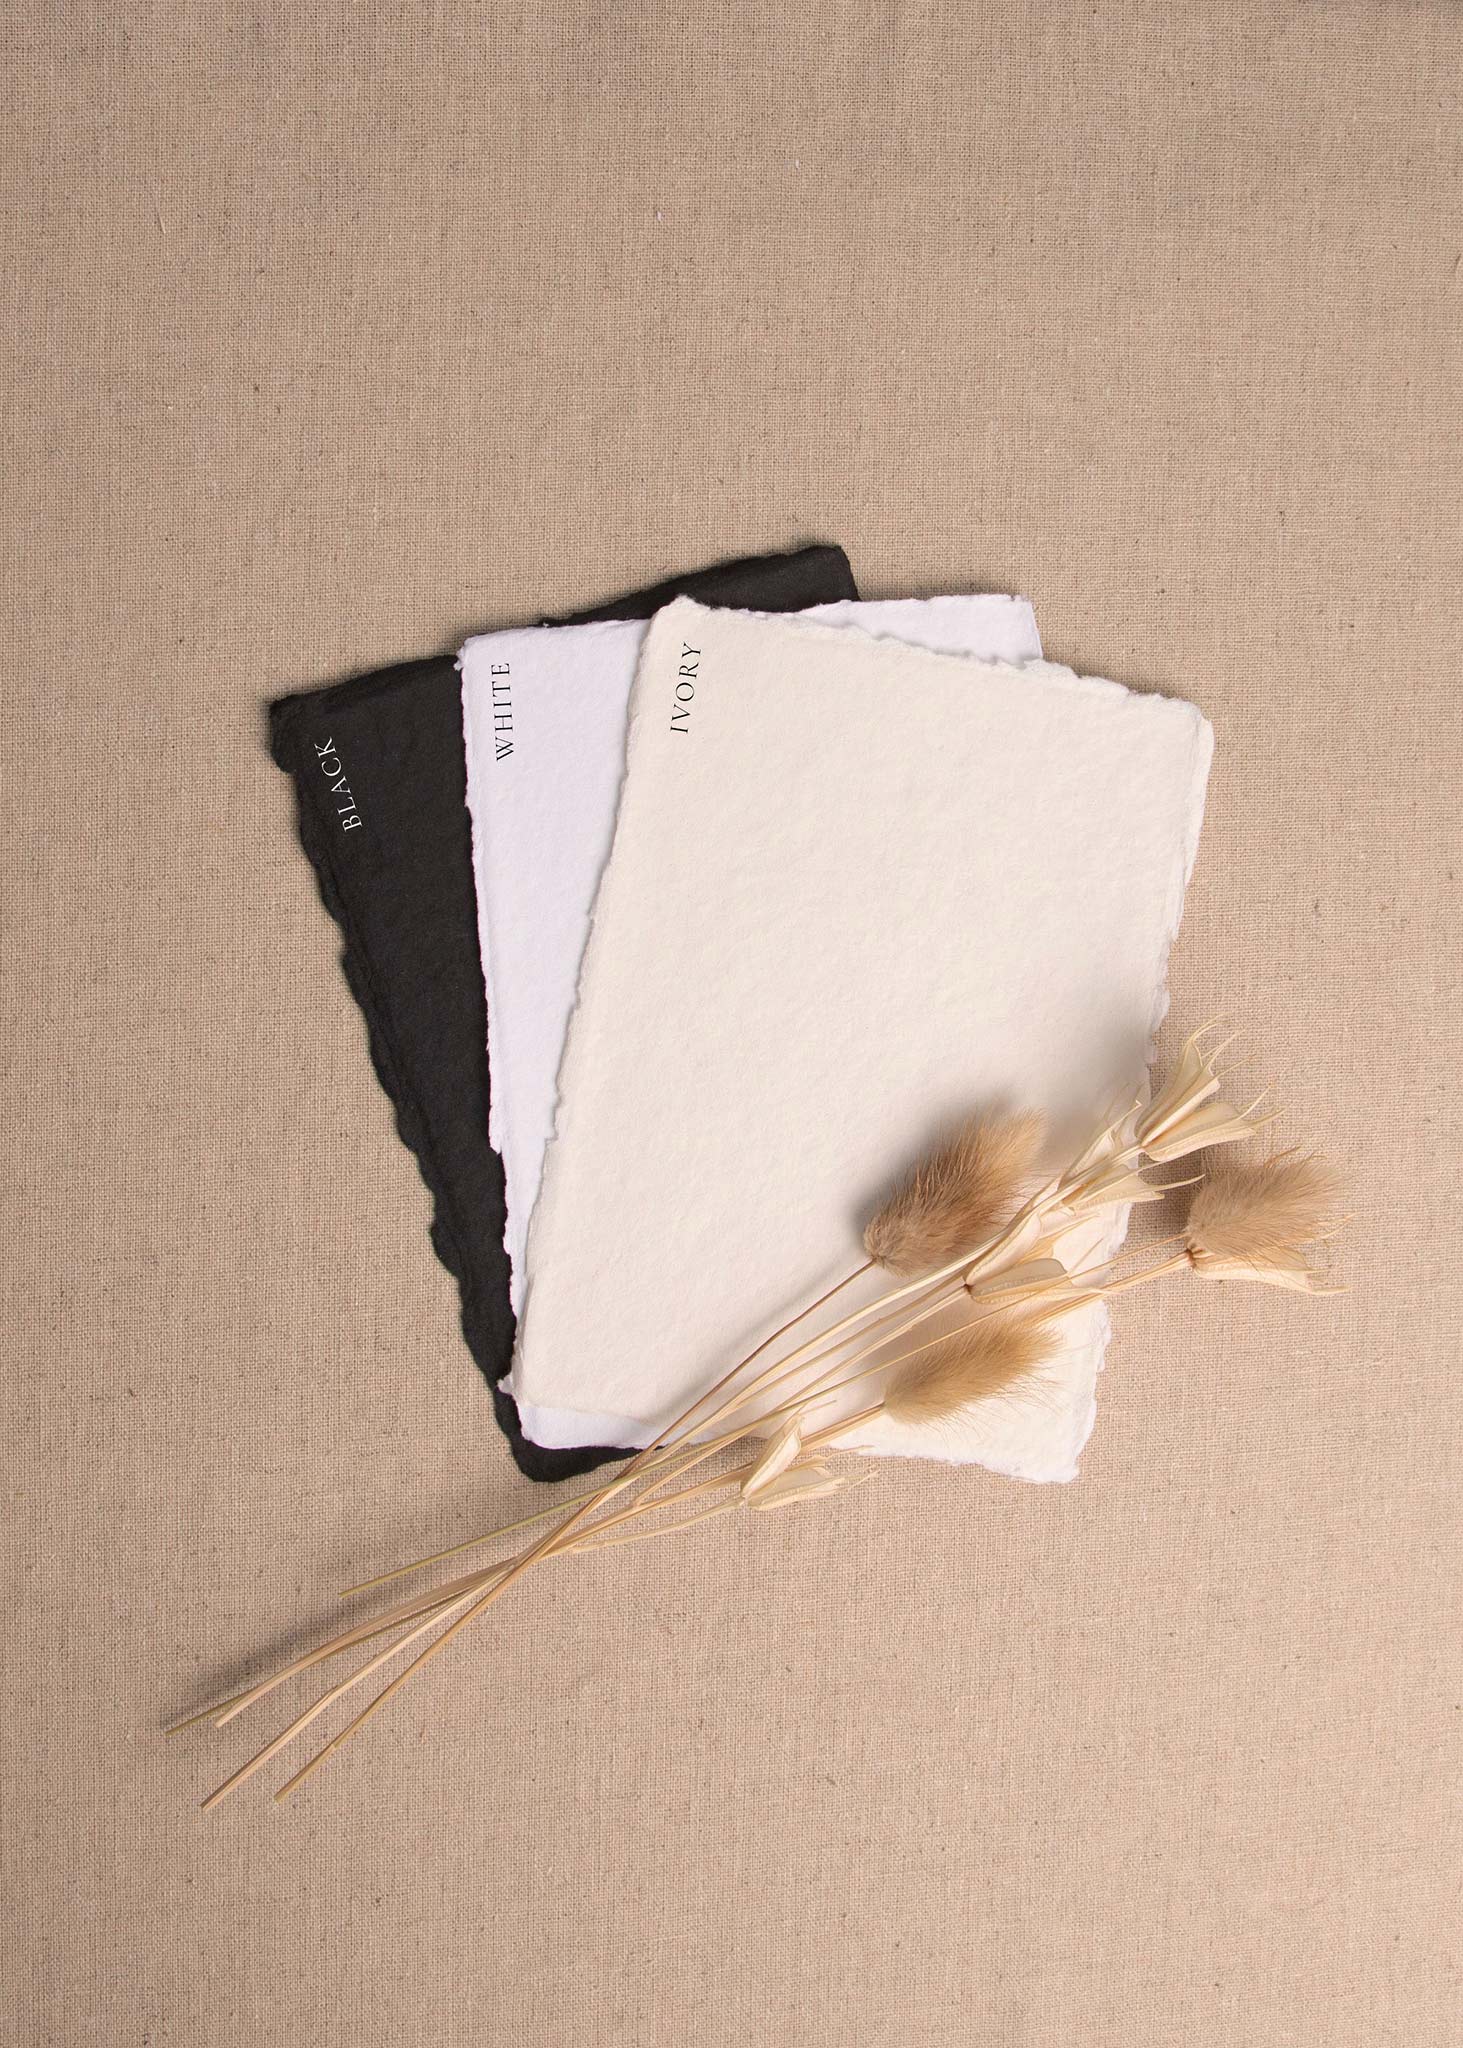 Fanned pile of Black, White, Ivory handmade paper sheets with deckle edge surrounded by dried flowers